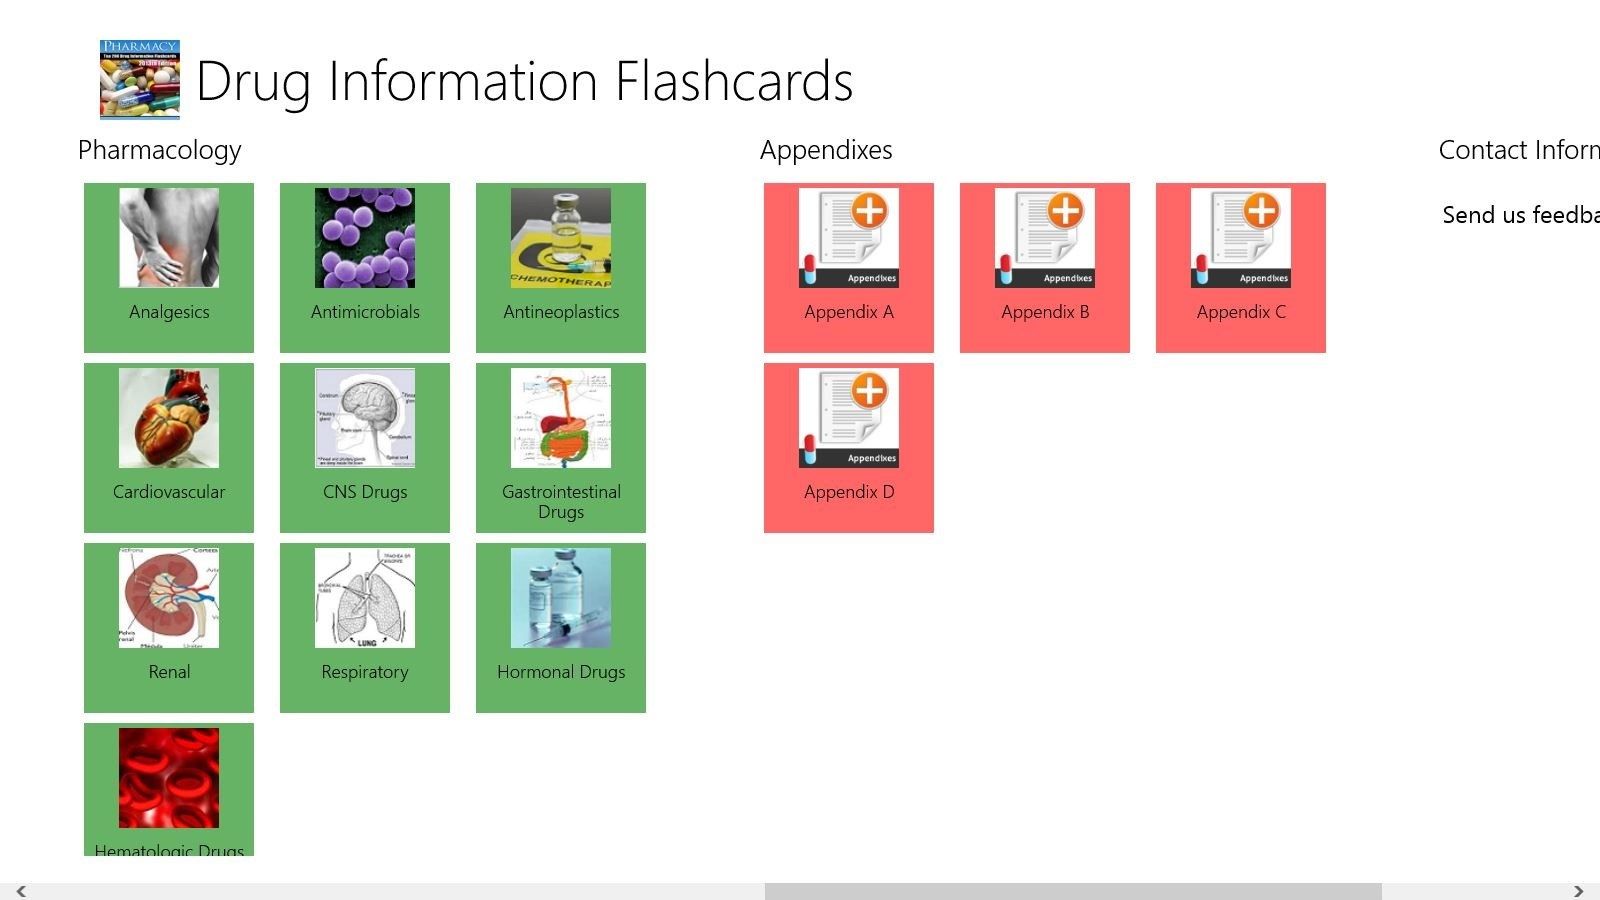 Menu sections of the flash cards